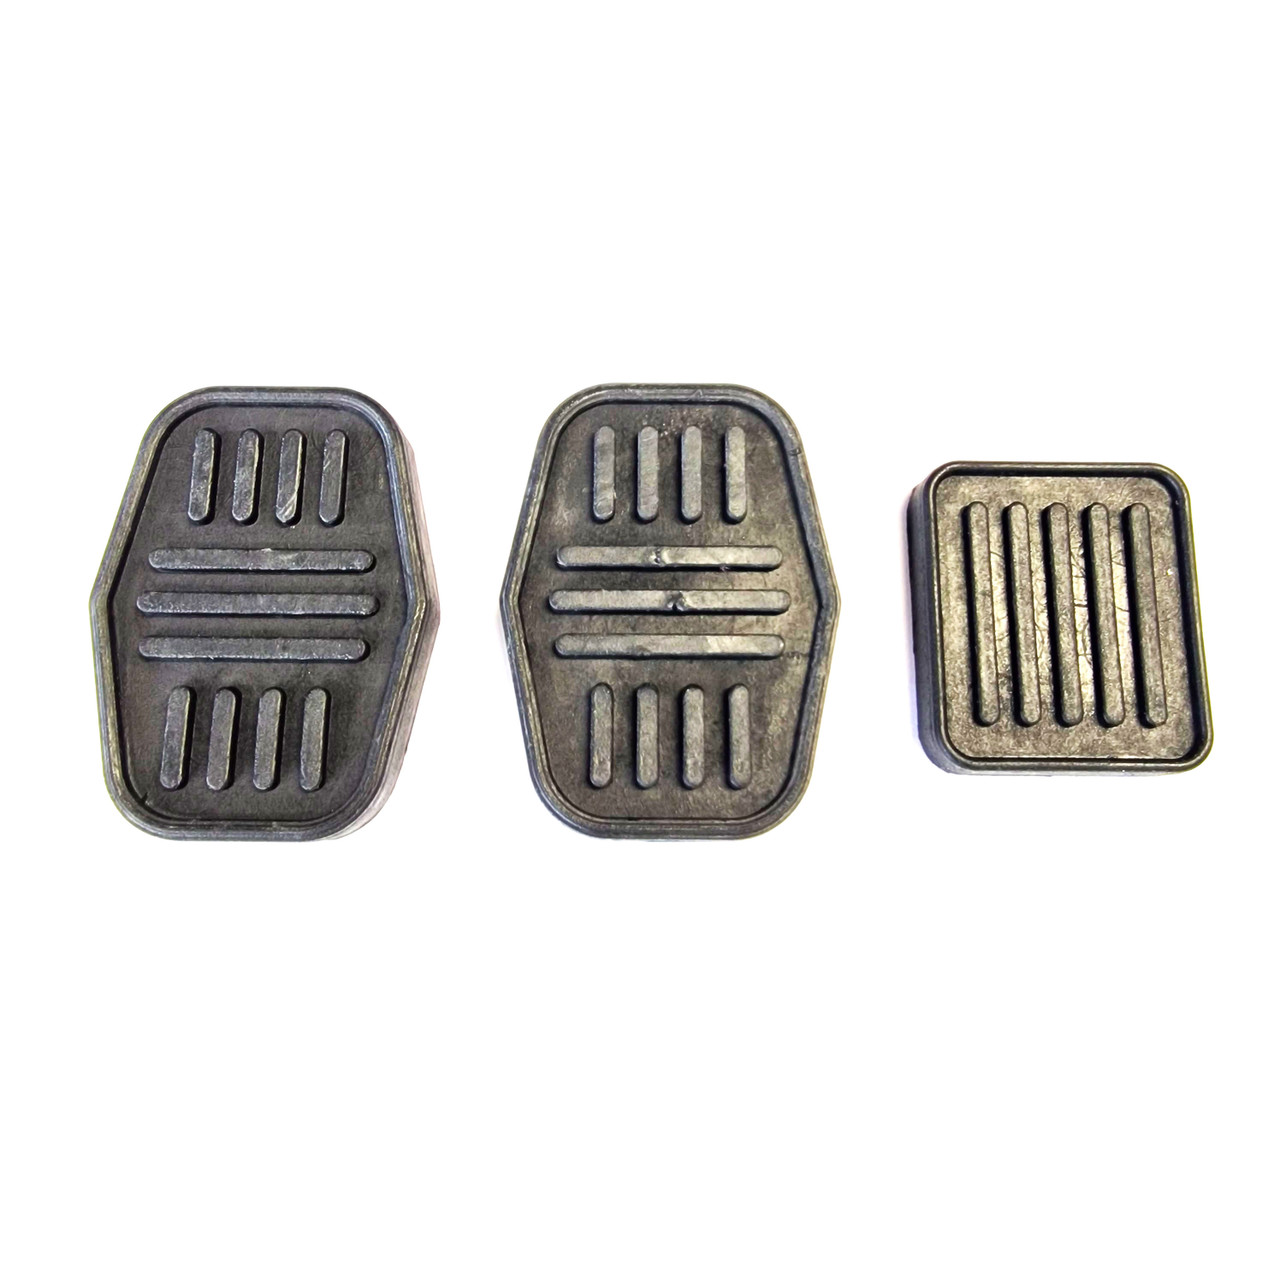 Late Brake, clutch and accelerator pedal rubber pad kit - Classic mini up to 1990